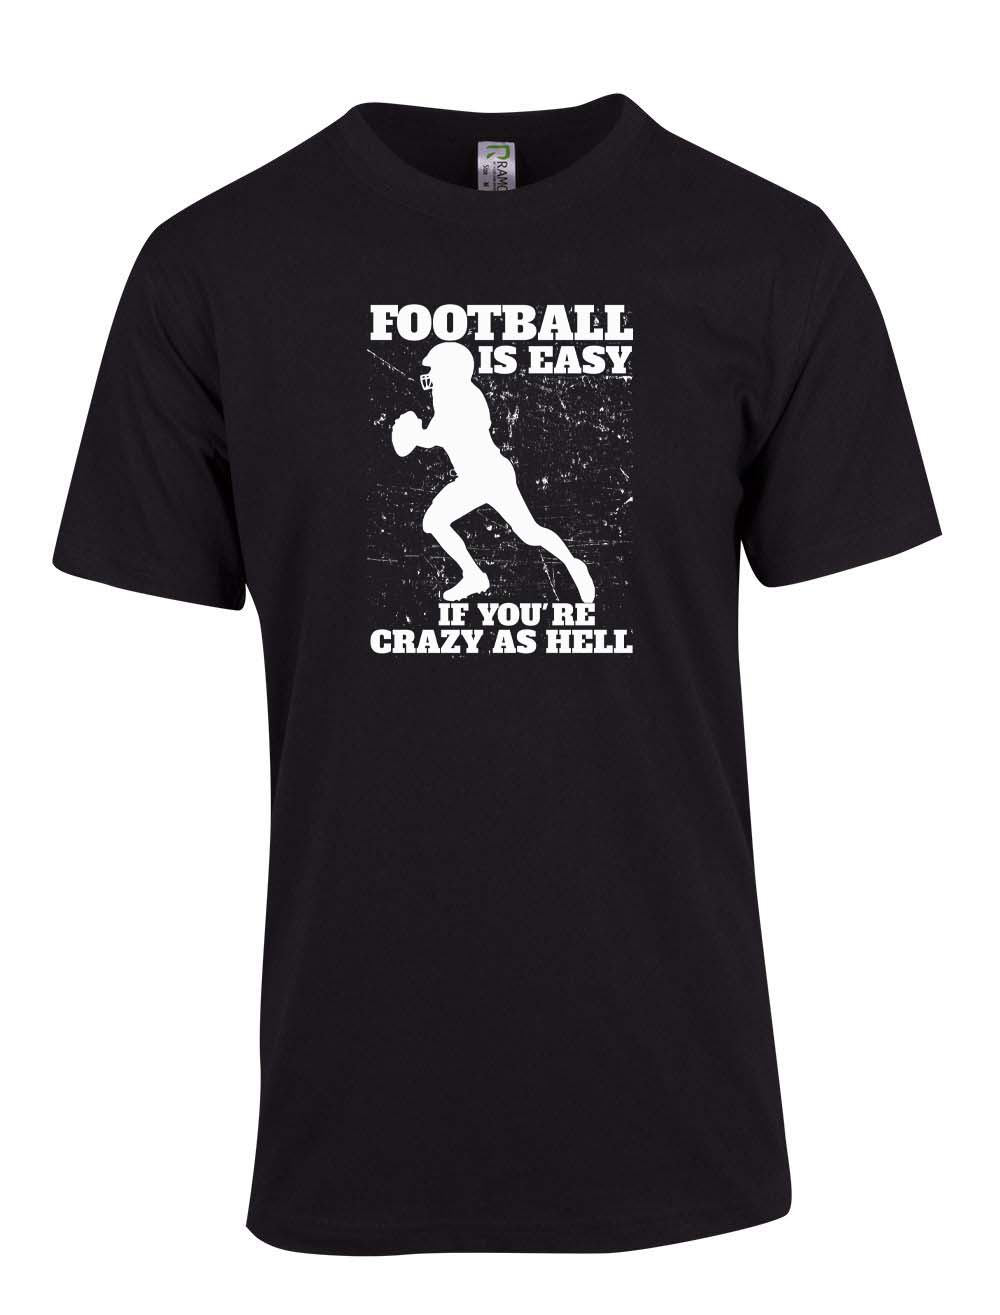 Football is easy if you are crazy T-Shirt